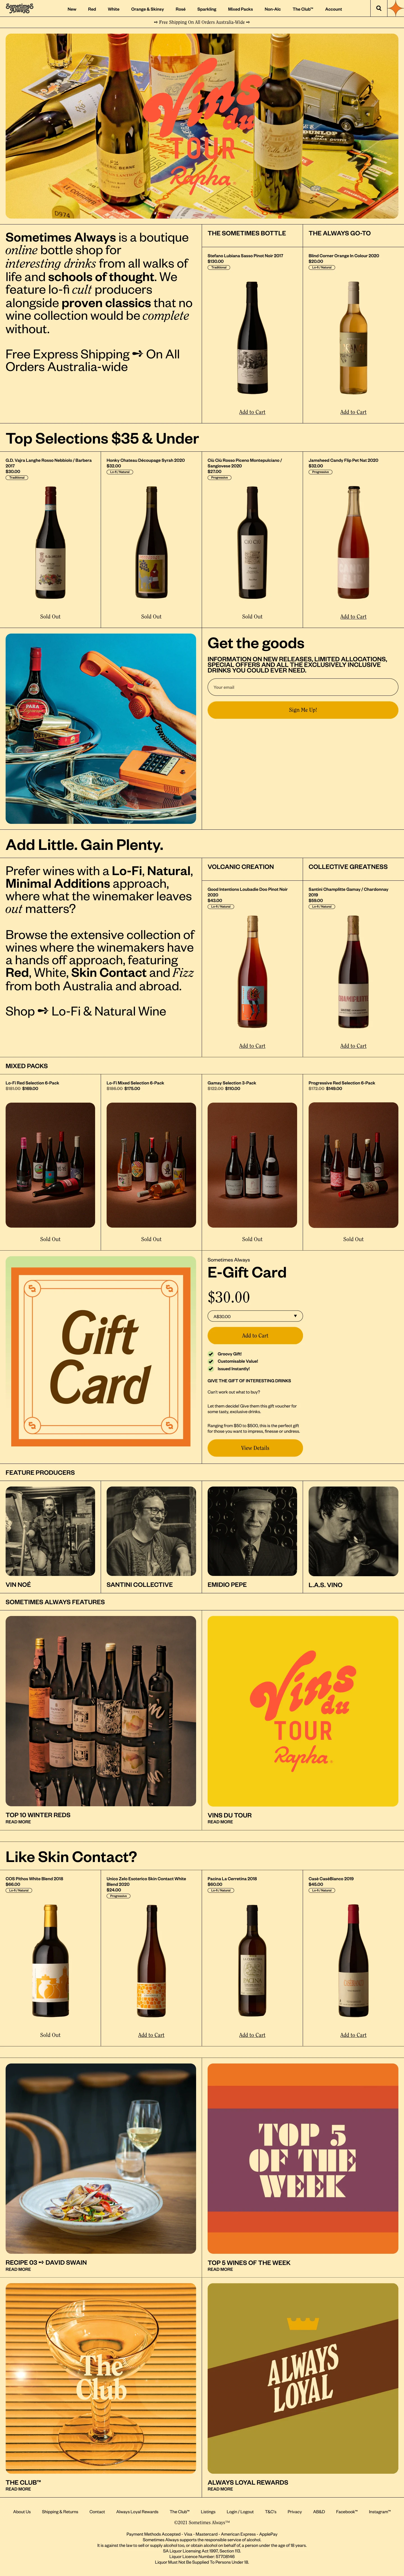 Sometimes Always Landing Page Example: Sometimes Always is a boutique online bottle shop for interesting drinks from all walks of life and schools of thought. We feature lo-fi cult producers alongside proven classics that no wine collection would be complete without.